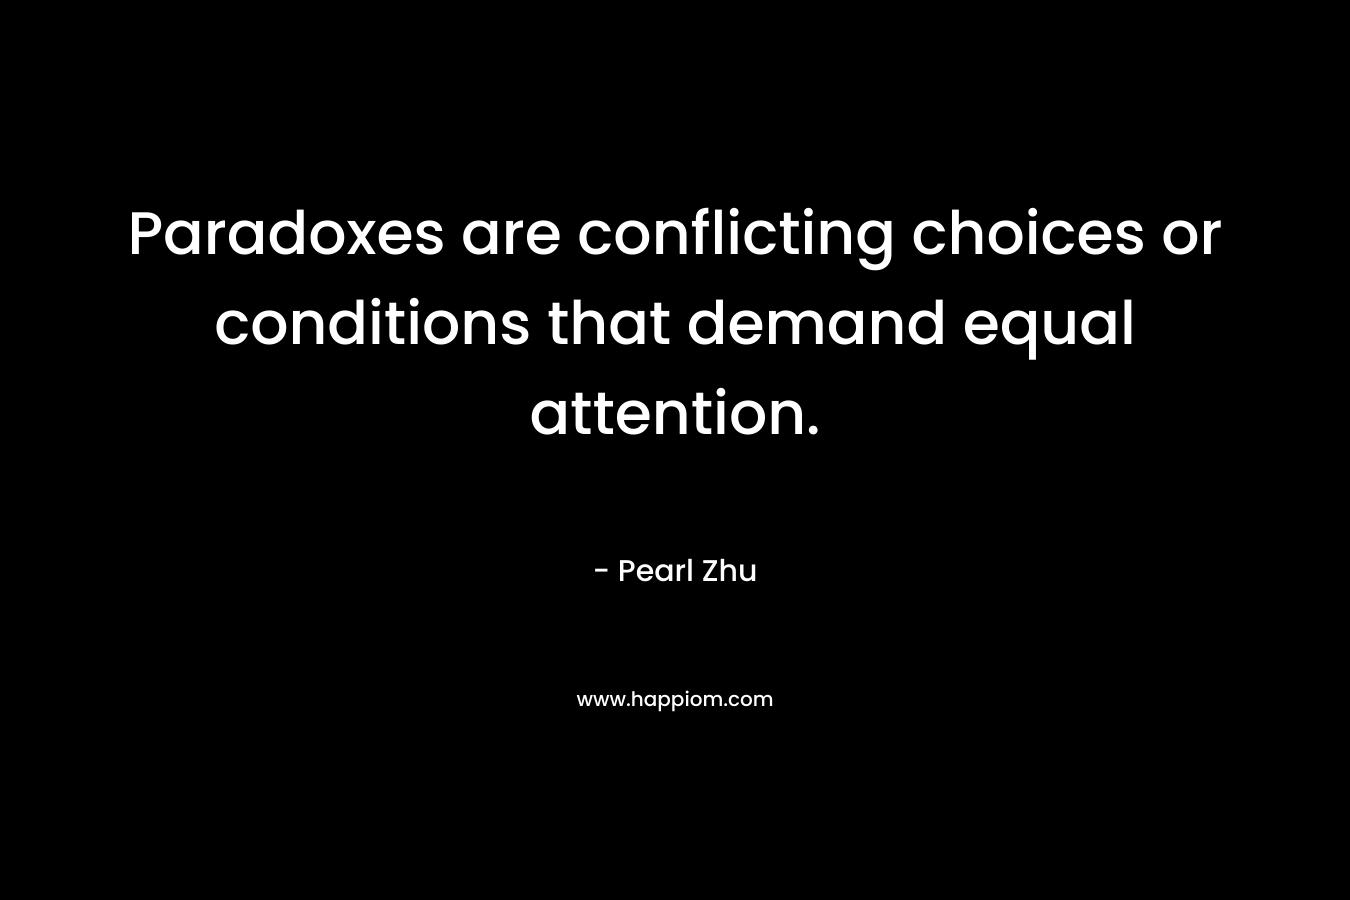 Paradoxes are conflicting choices or conditions that demand equal attention. – Pearl Zhu